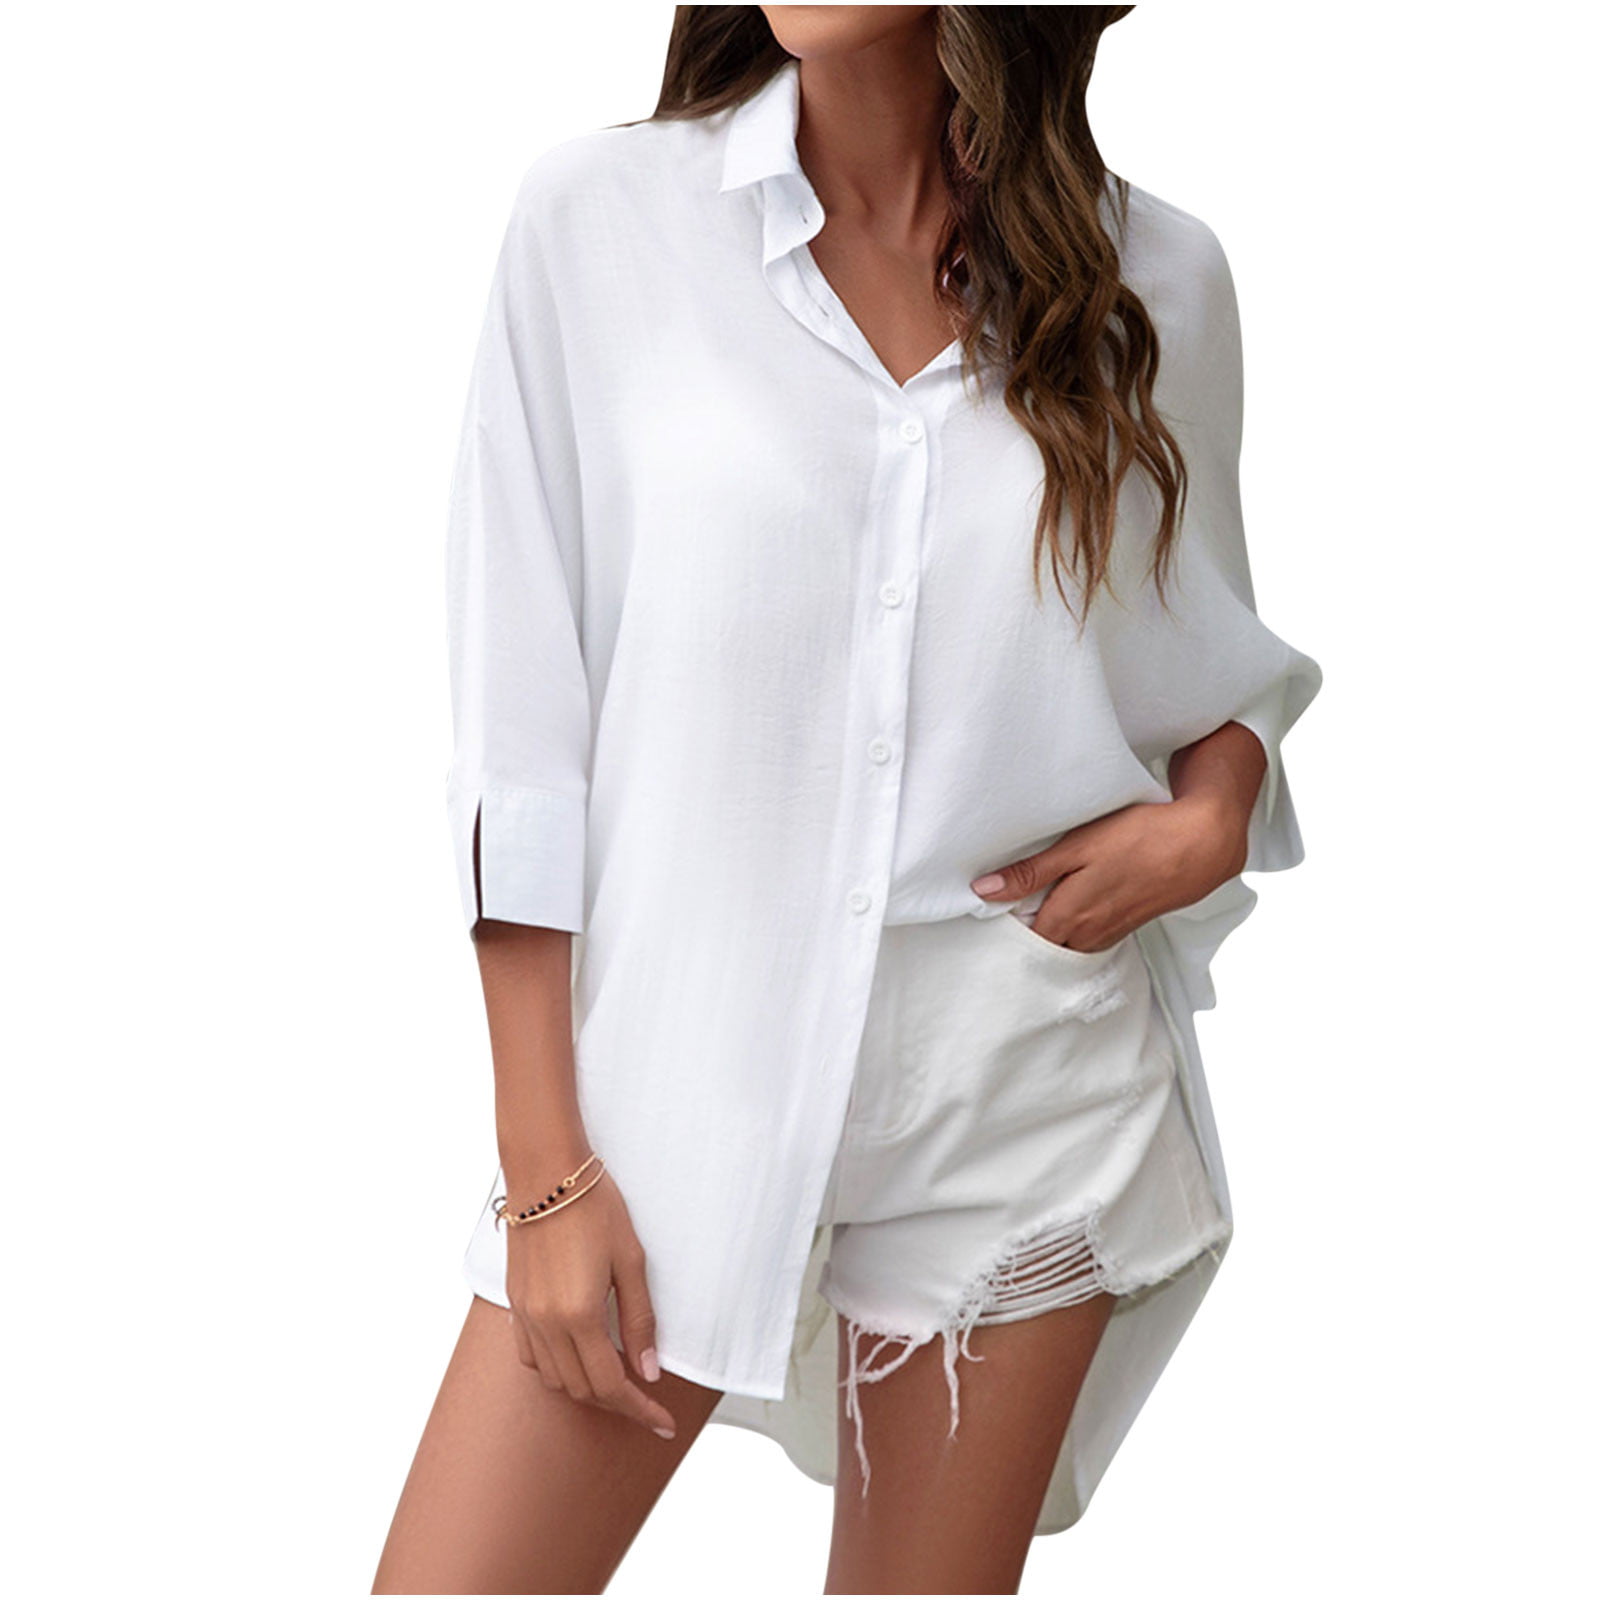 Cute Party Shirts for Women V Neck 3/4 Sleeve Womens Blouses and Tops ...